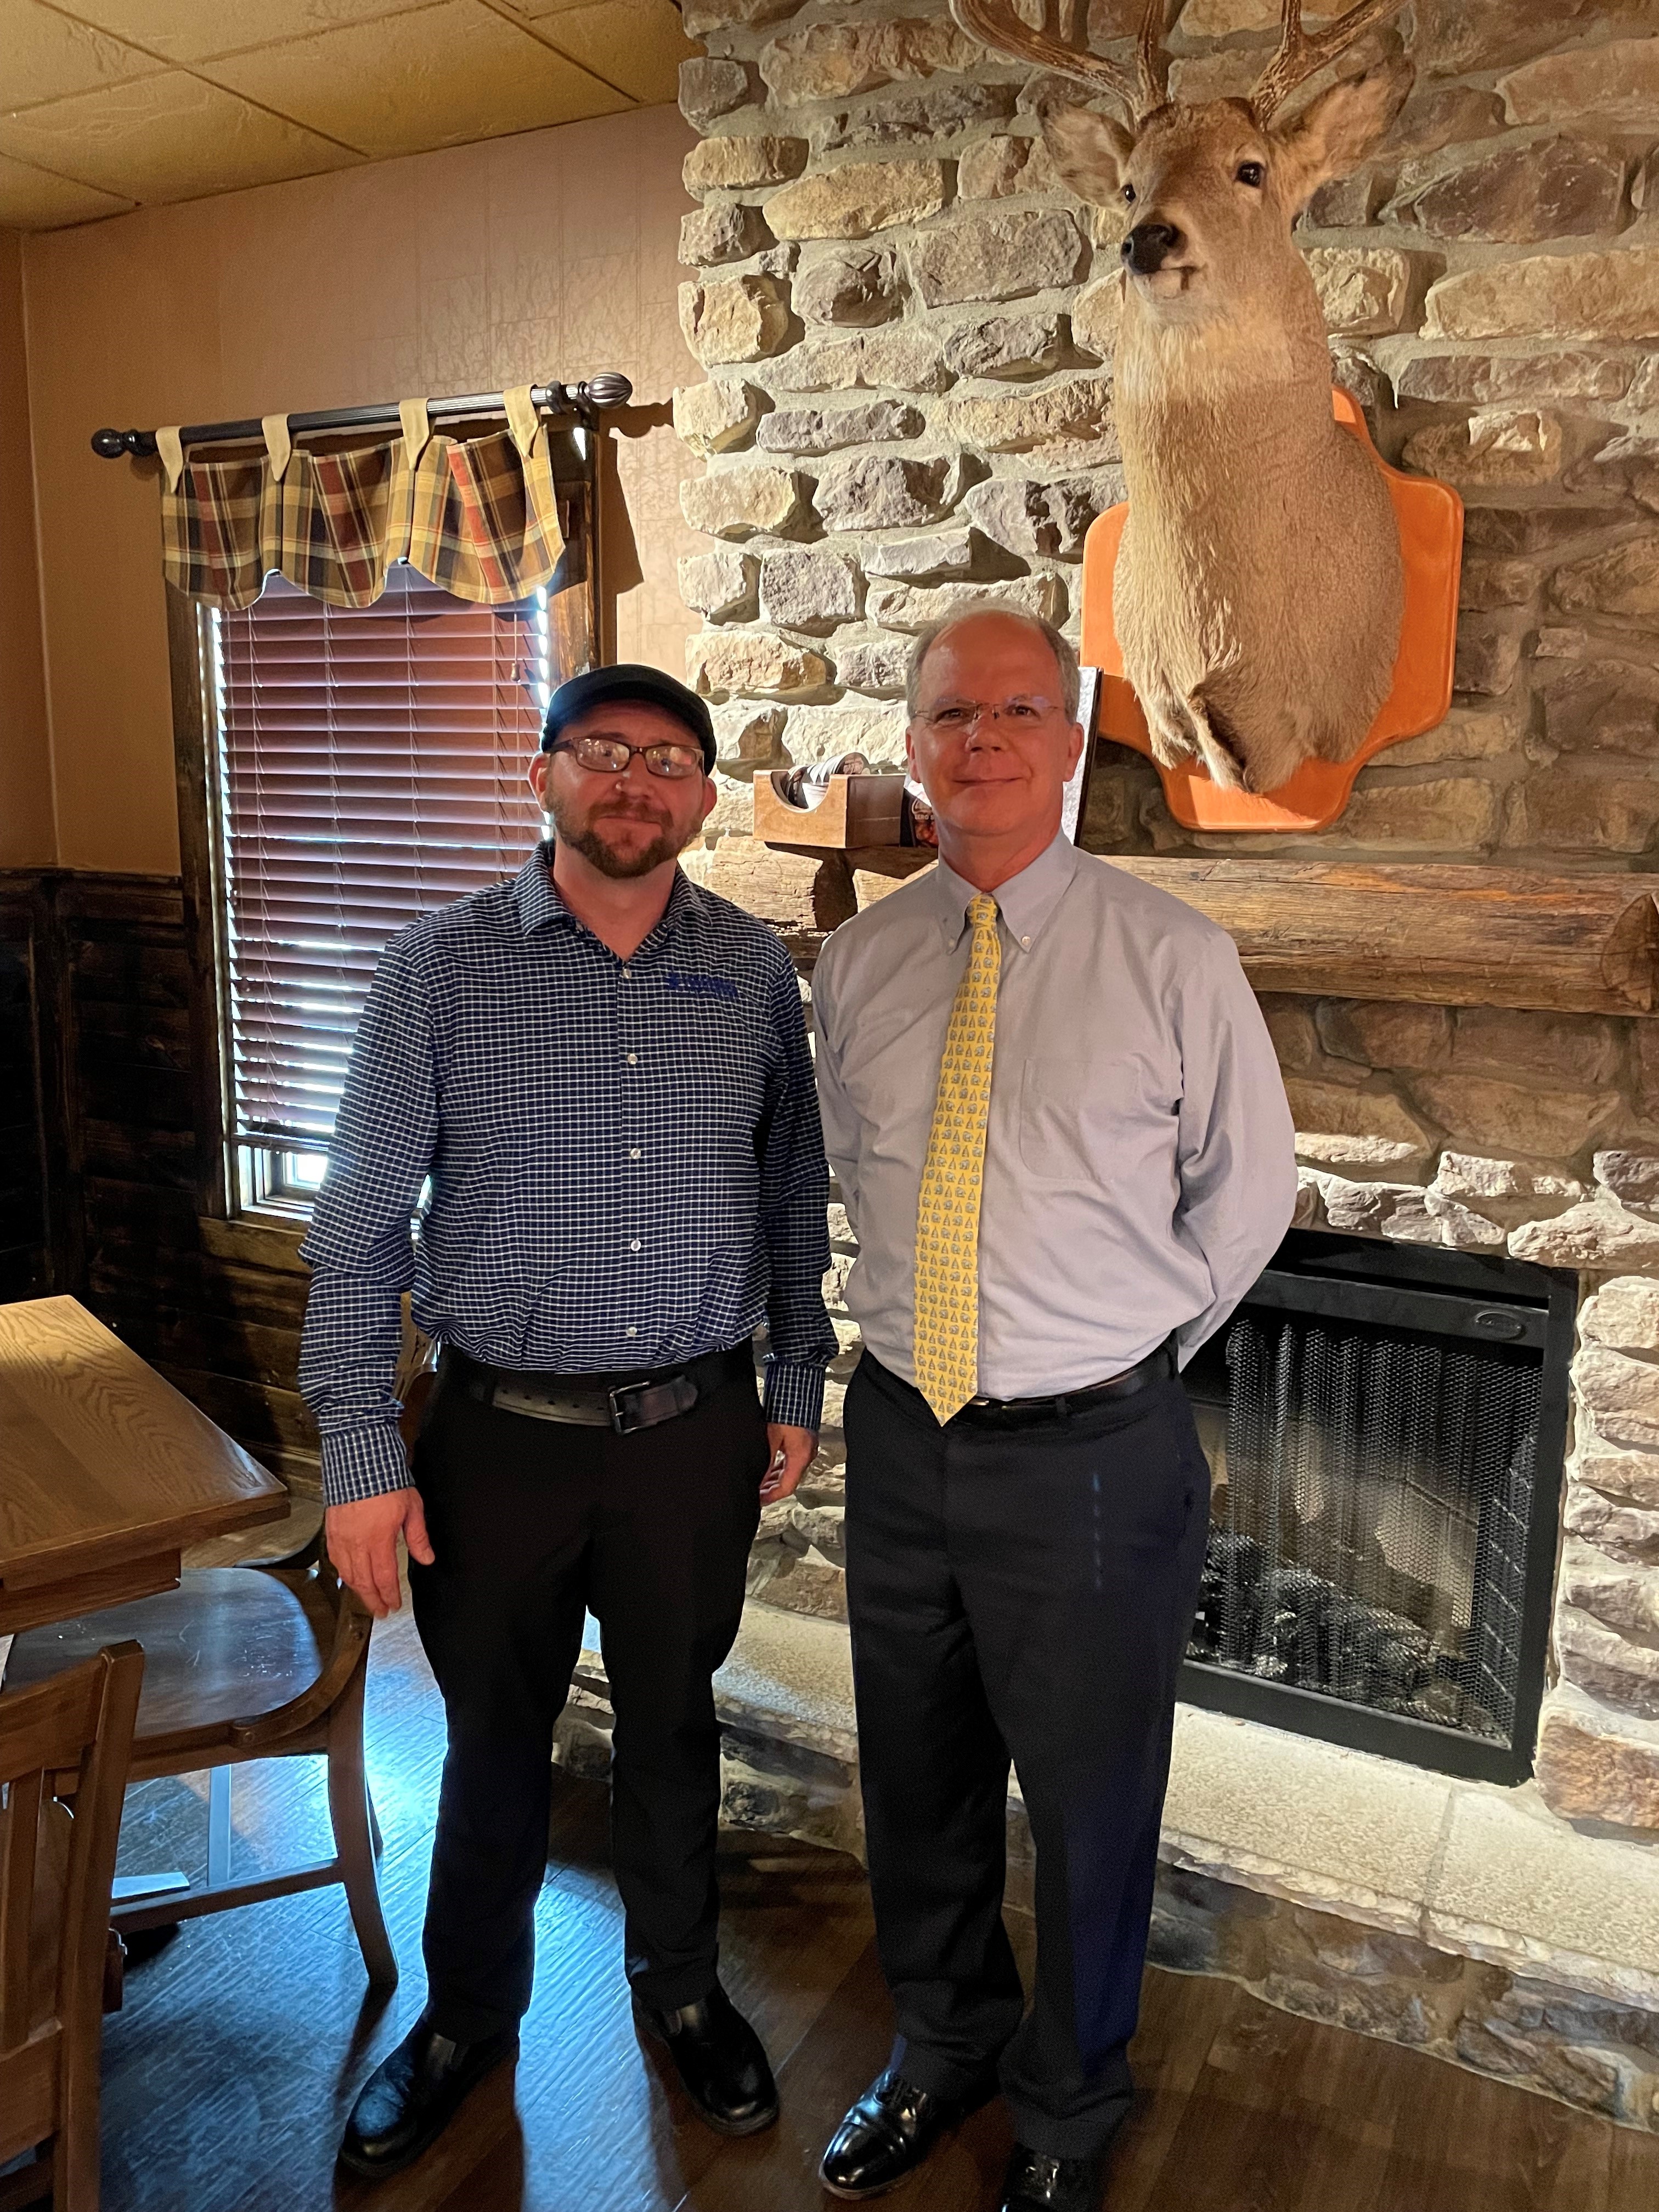 Rep. Guthrie meeting with Ben, general manager of Colton’s Steak House & Grill